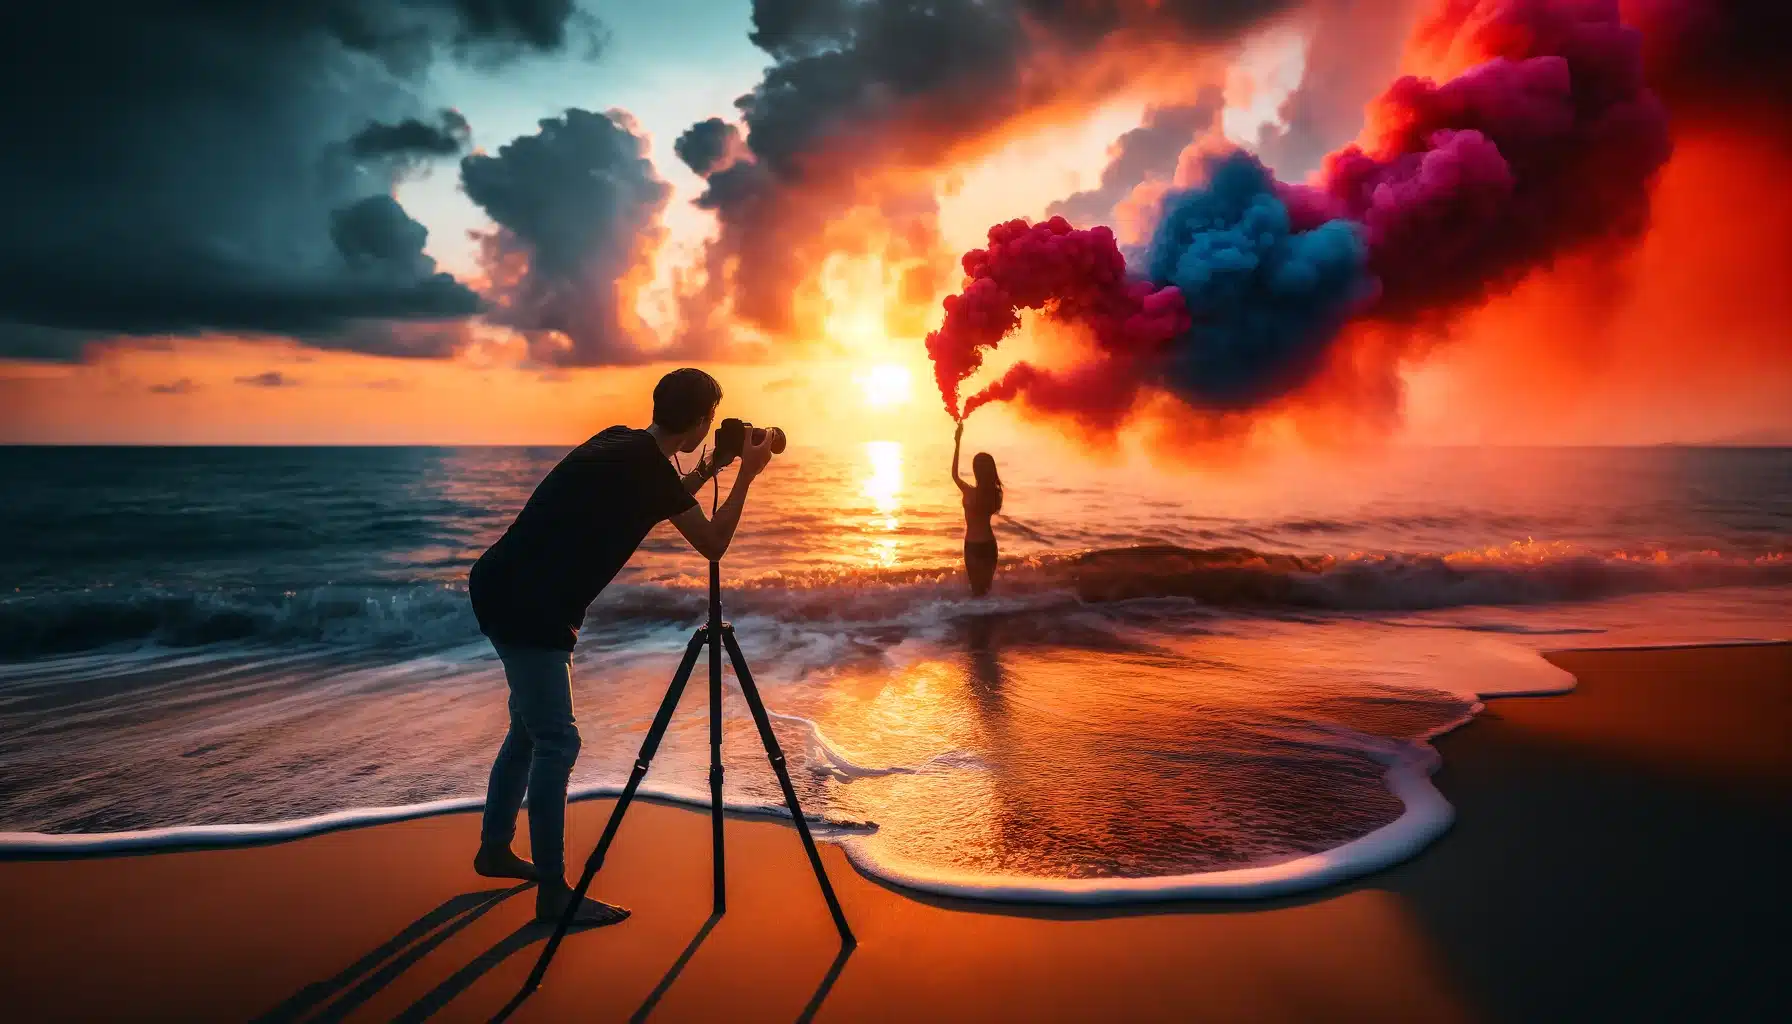 A creative beach photography scene at sunset with a person using a camera on a tripod by the ocean while a girl holds a smoke bomb, dispersing colorful smoke.